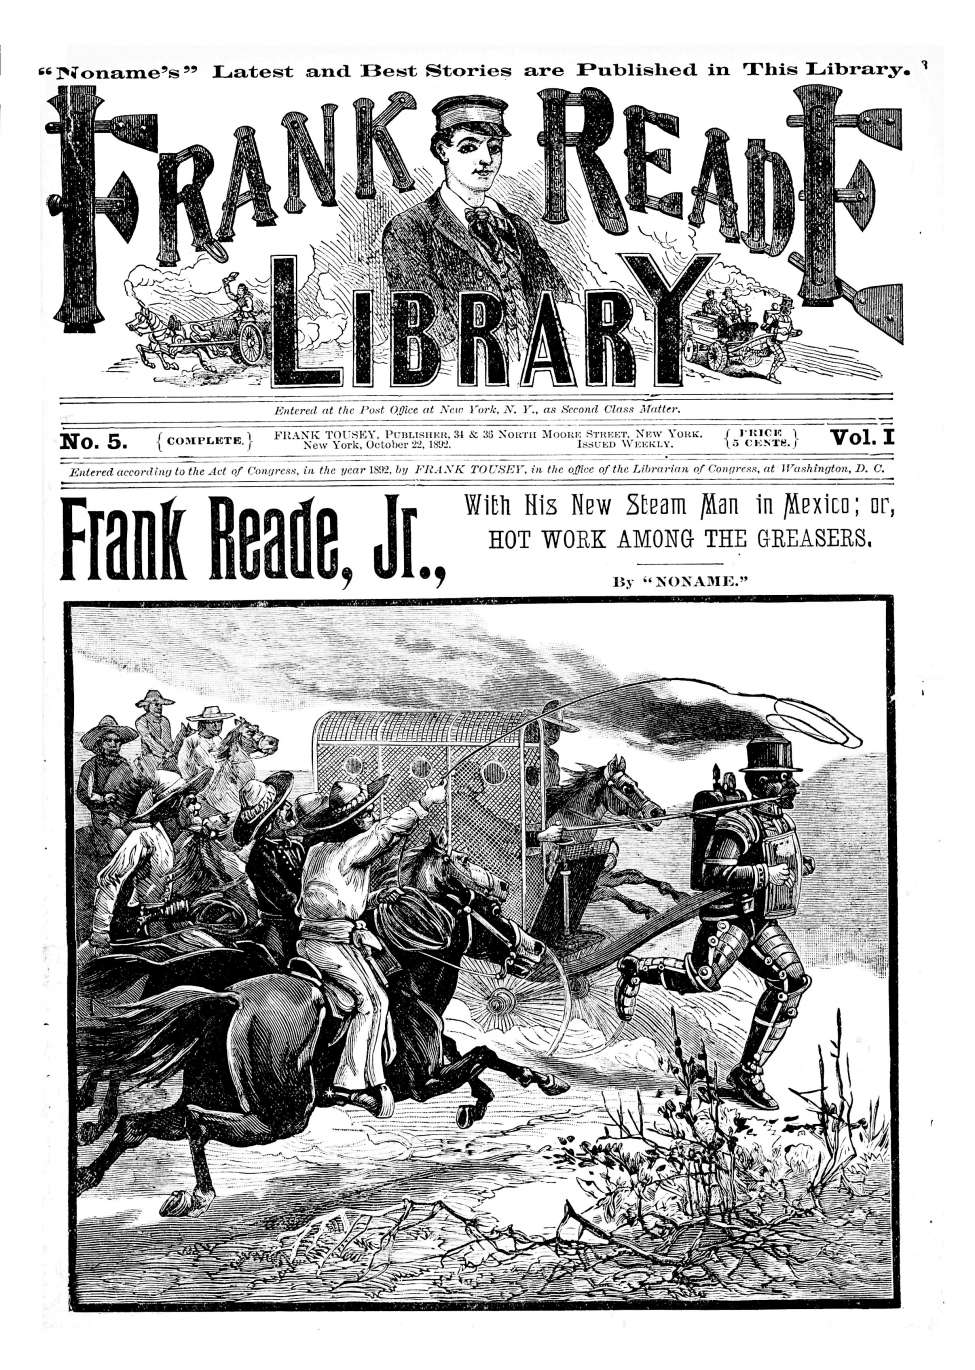 Comic Book Cover For v01 5 - Frank Reade, Jr., with His New Steam Man in Mexico